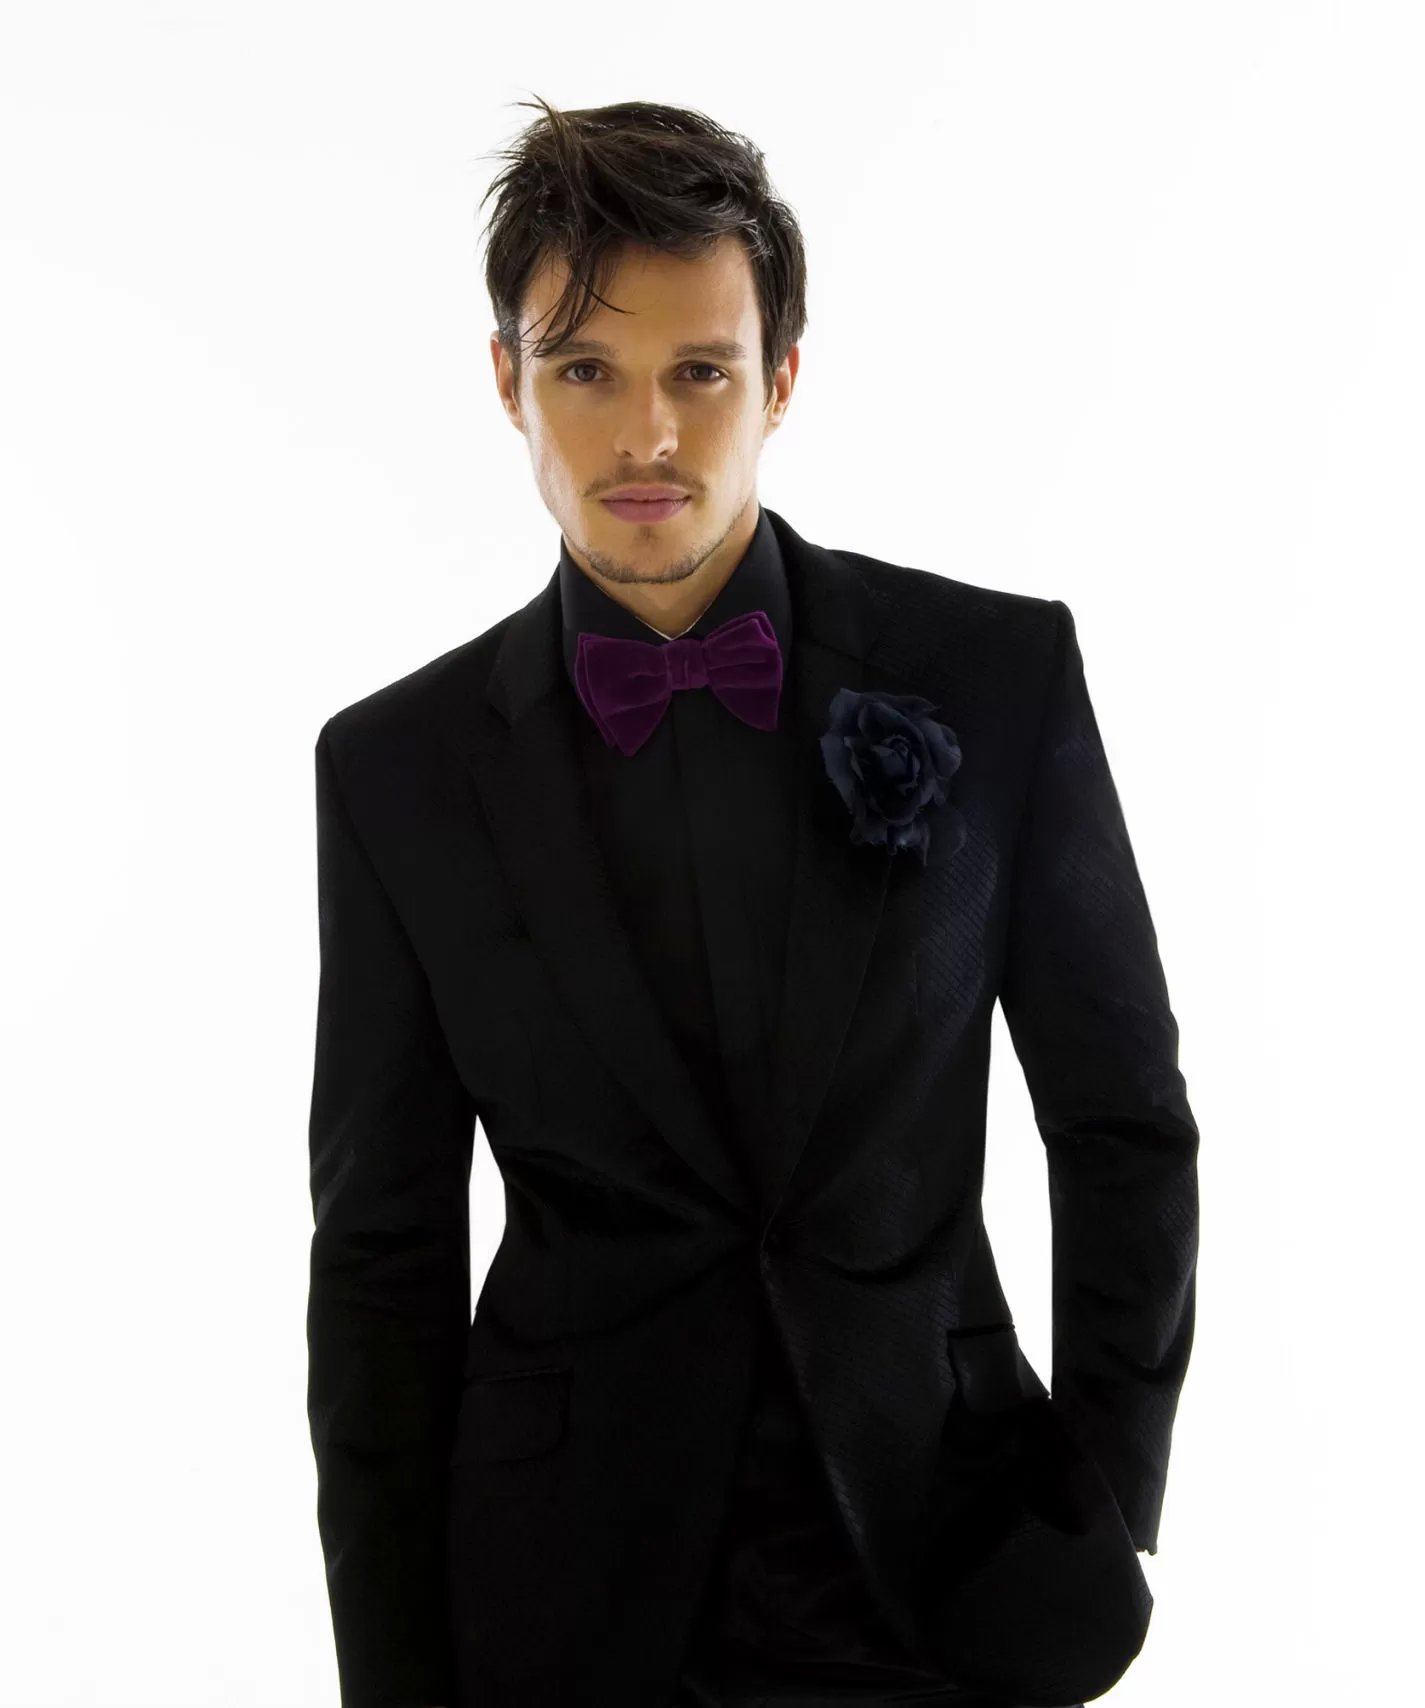 Top Ten Styles You Can Get from a Tuxedo Rental